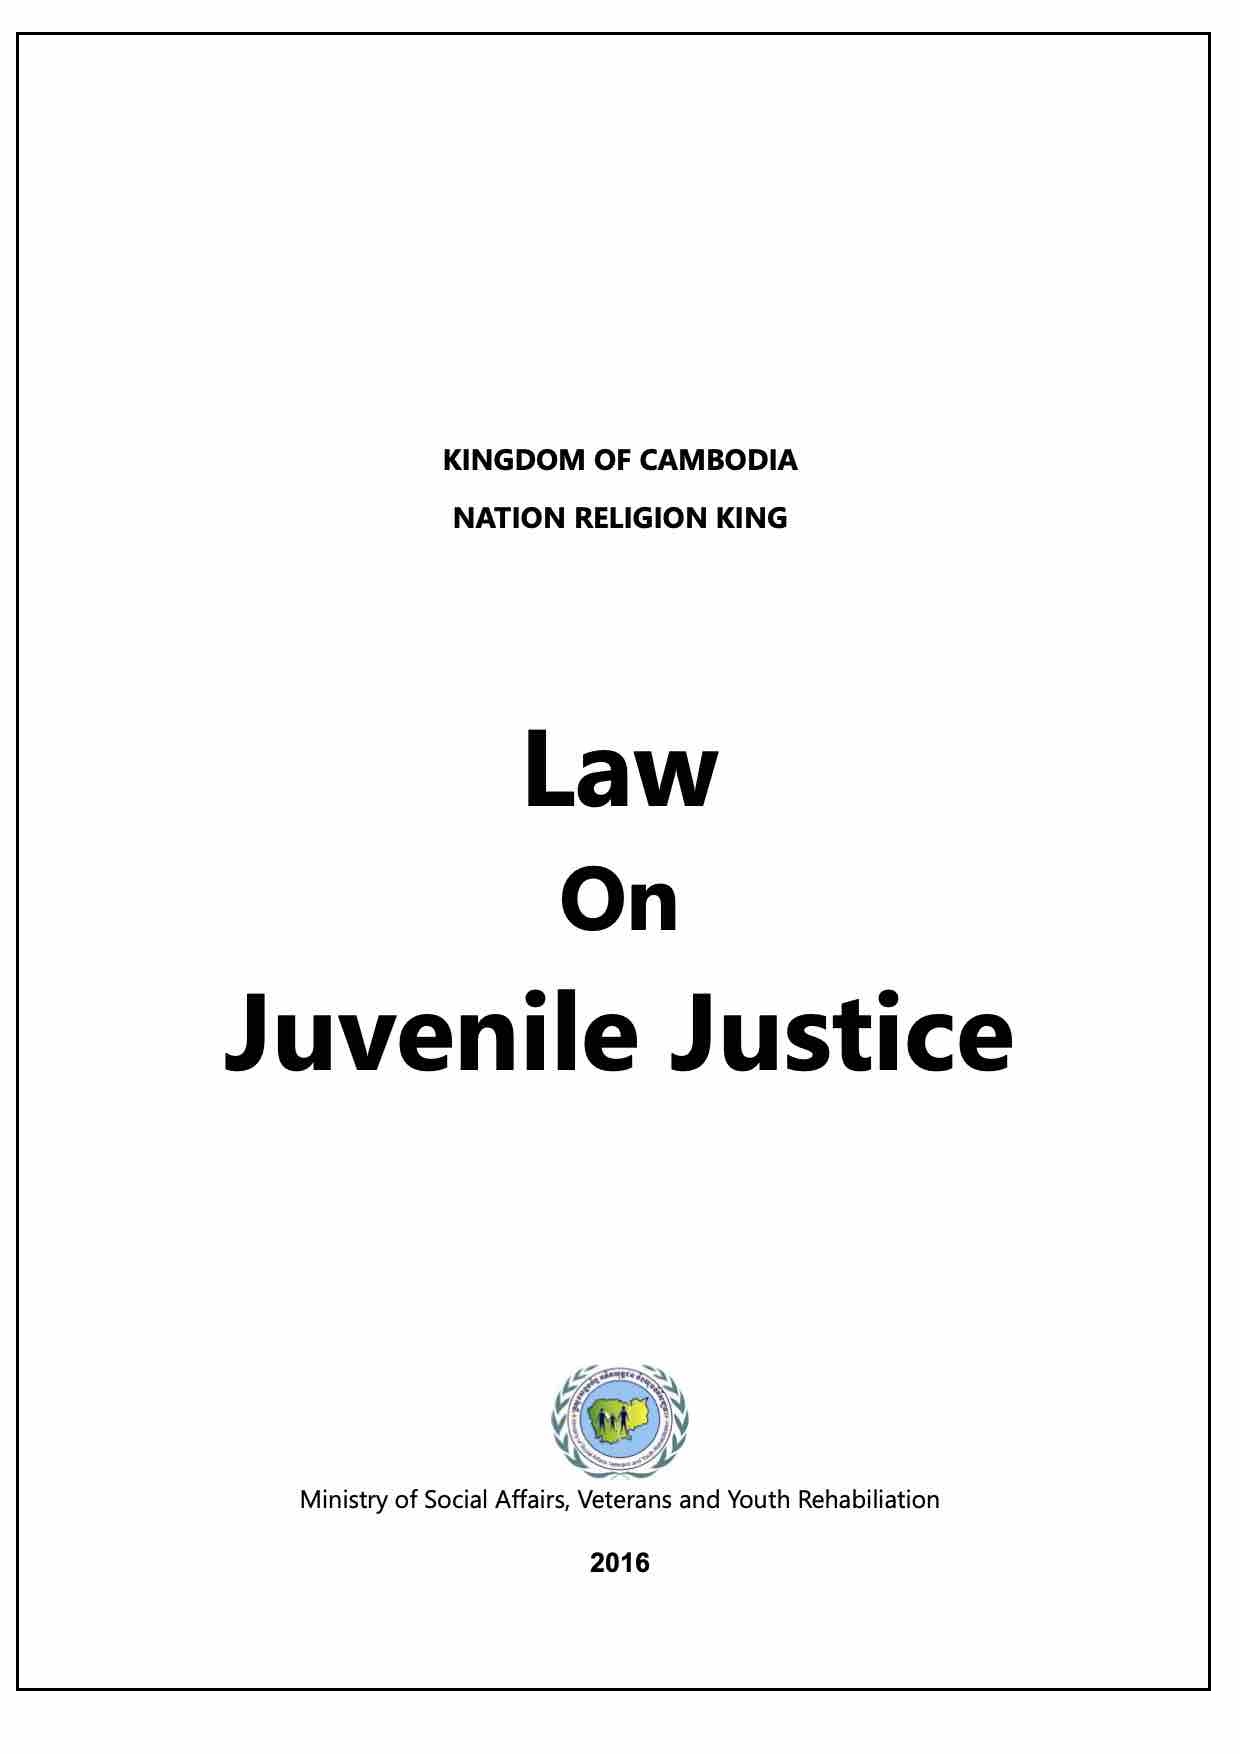 https://strongfamily.mosvy.gov.kh/wp-content/uploads/2019/10/Ministry-of-Social-Affairs-Juvenile-Justice-Law-2016-En.jpg